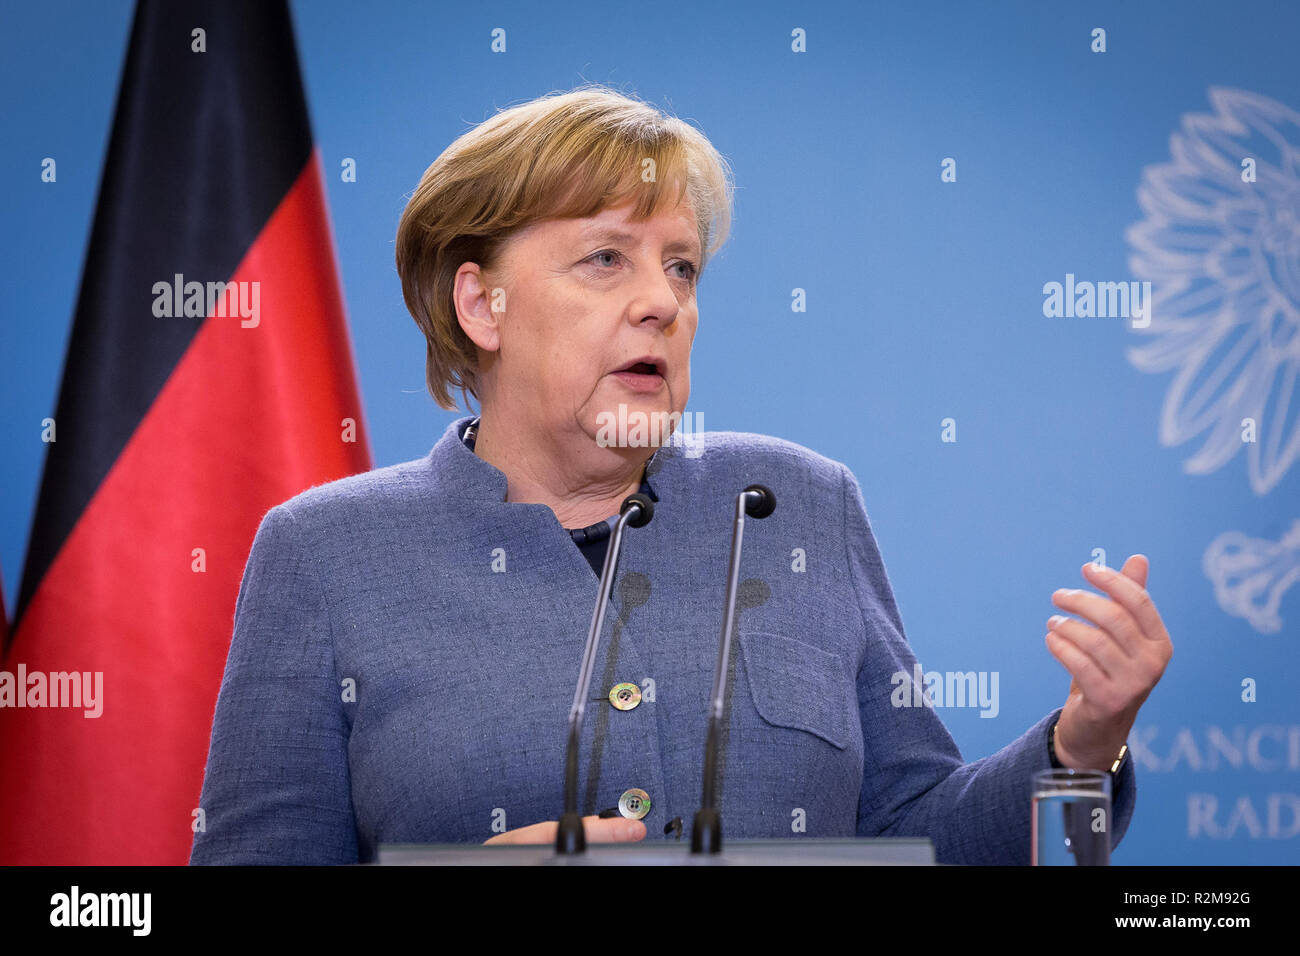 German Chancellor Angela Merkel attend a press conference with Polish Prime Minister Mateusz Morawiecki after their meeting at the Chancellery of the Prime Minister in Warsaw, Poland on 19 March 2018 Stock Photo